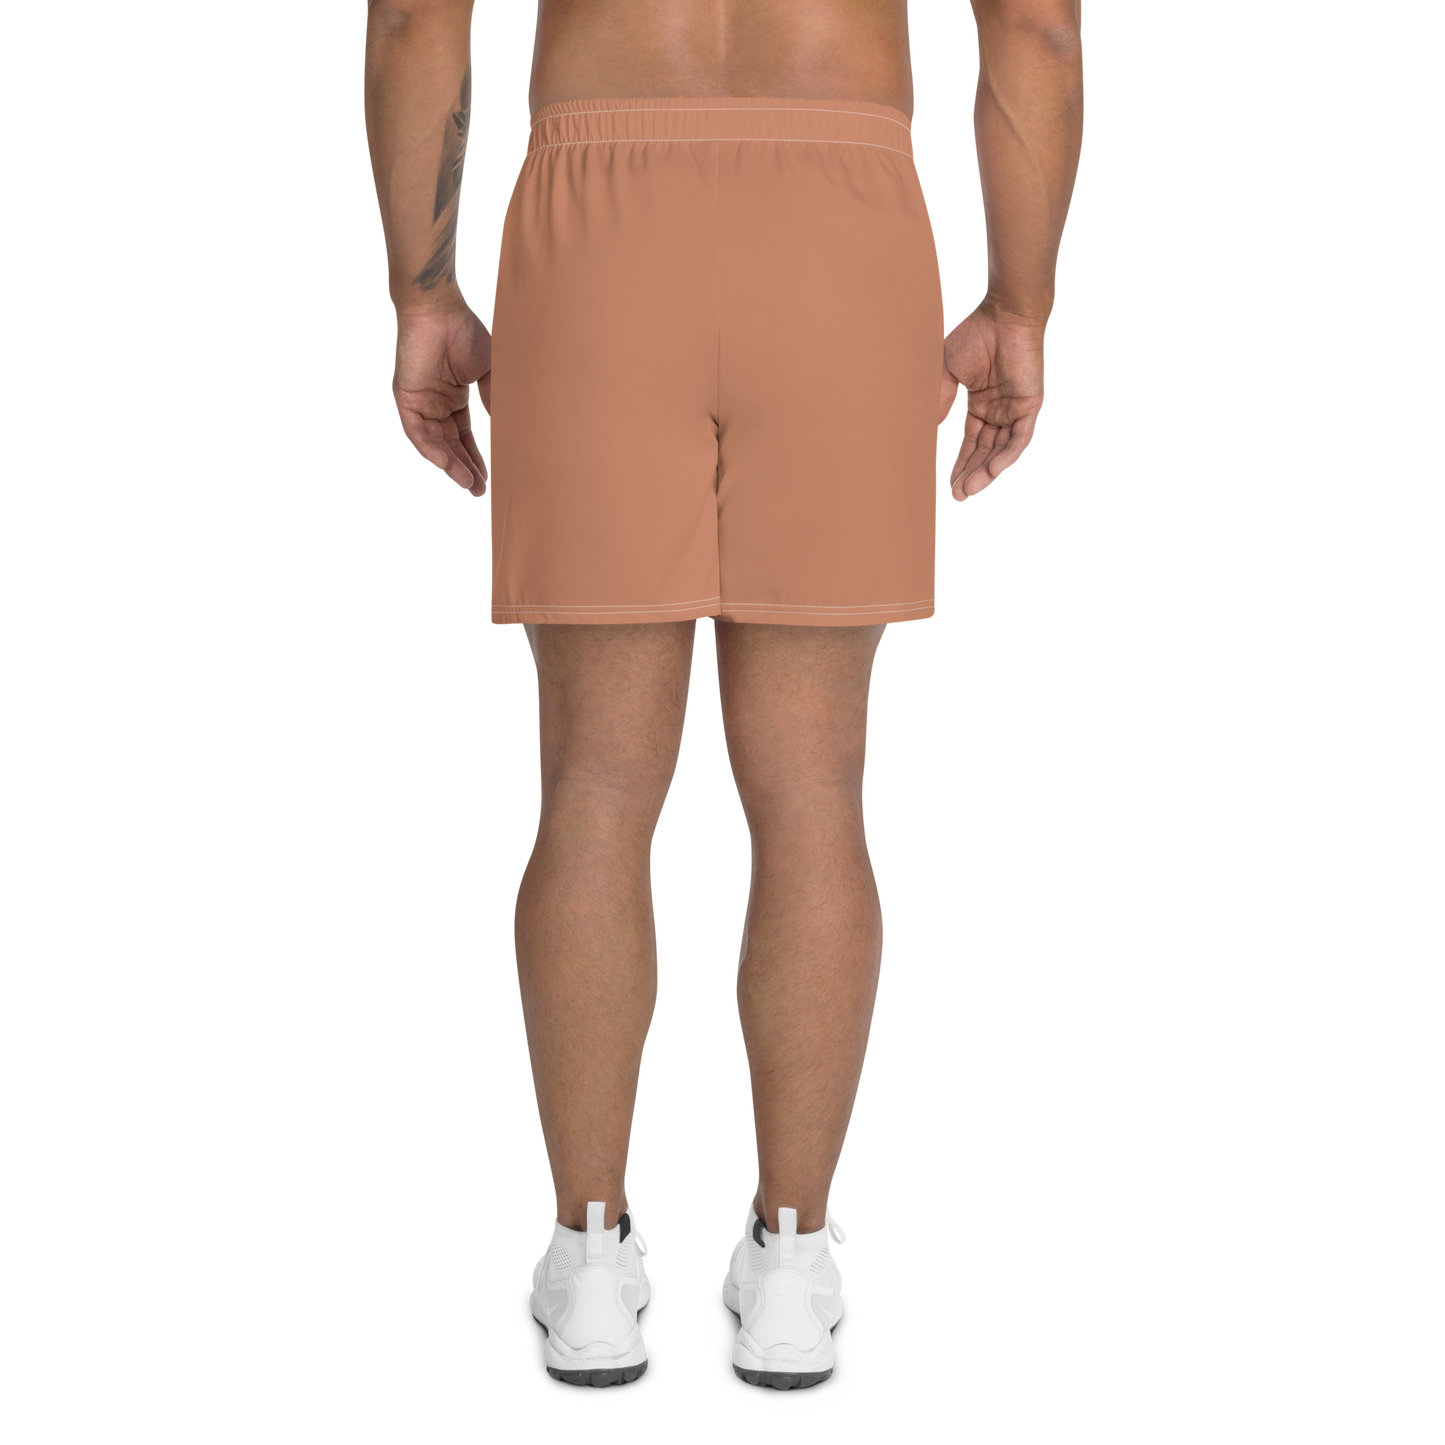 Michigan Upper Peninsula Athletic Shorts (w/ UP USA Outline) | Men's - Copper Color